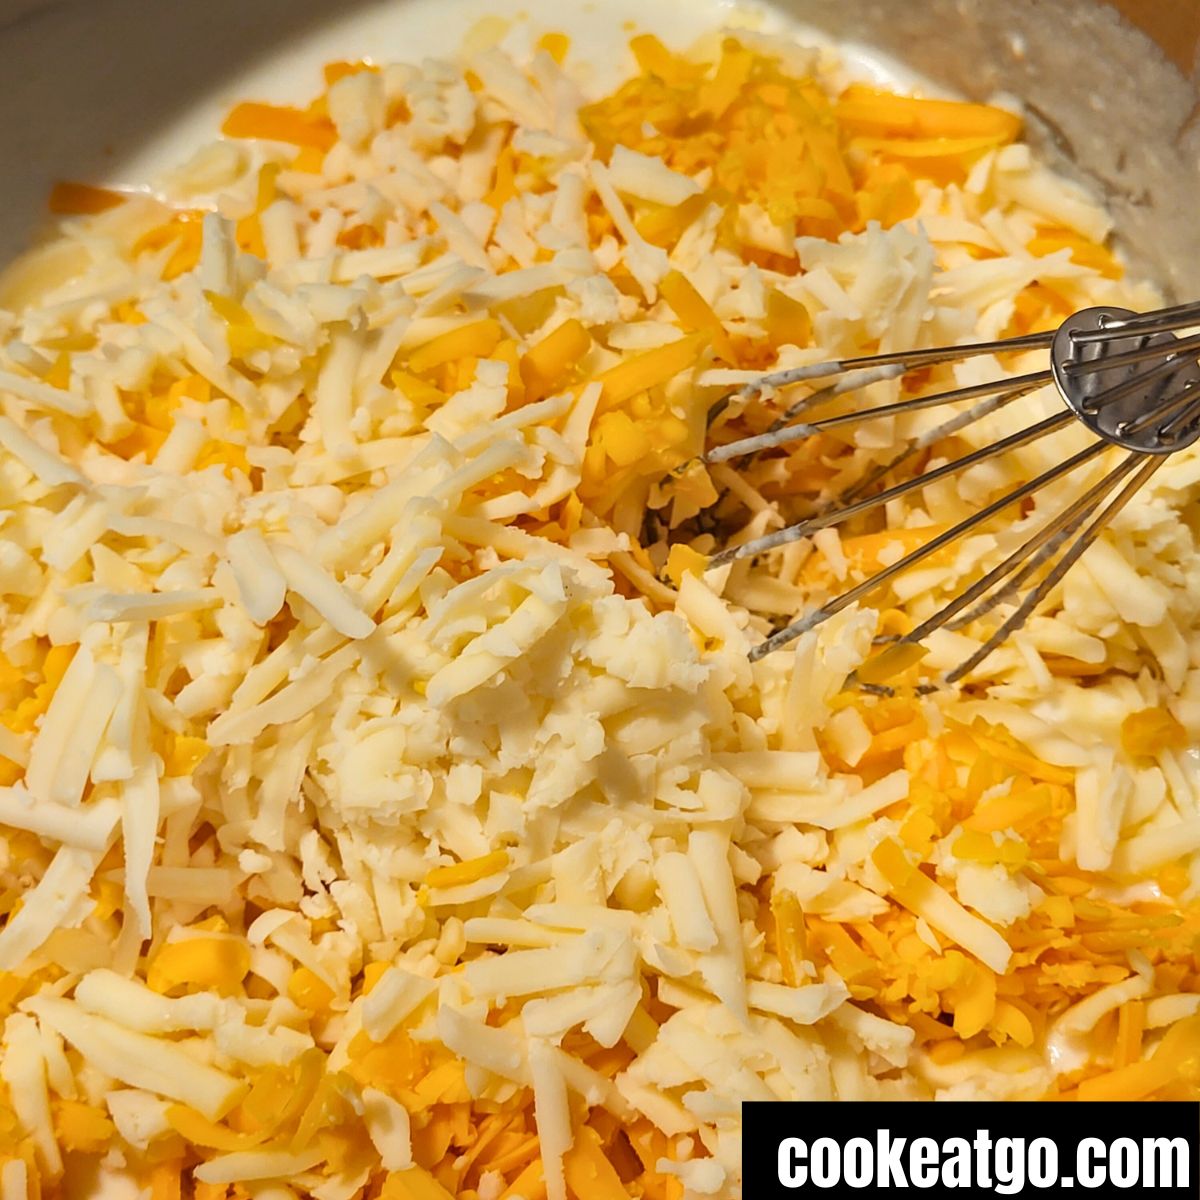 Shredded cheese melting into cream cheese milk mixture in a pot